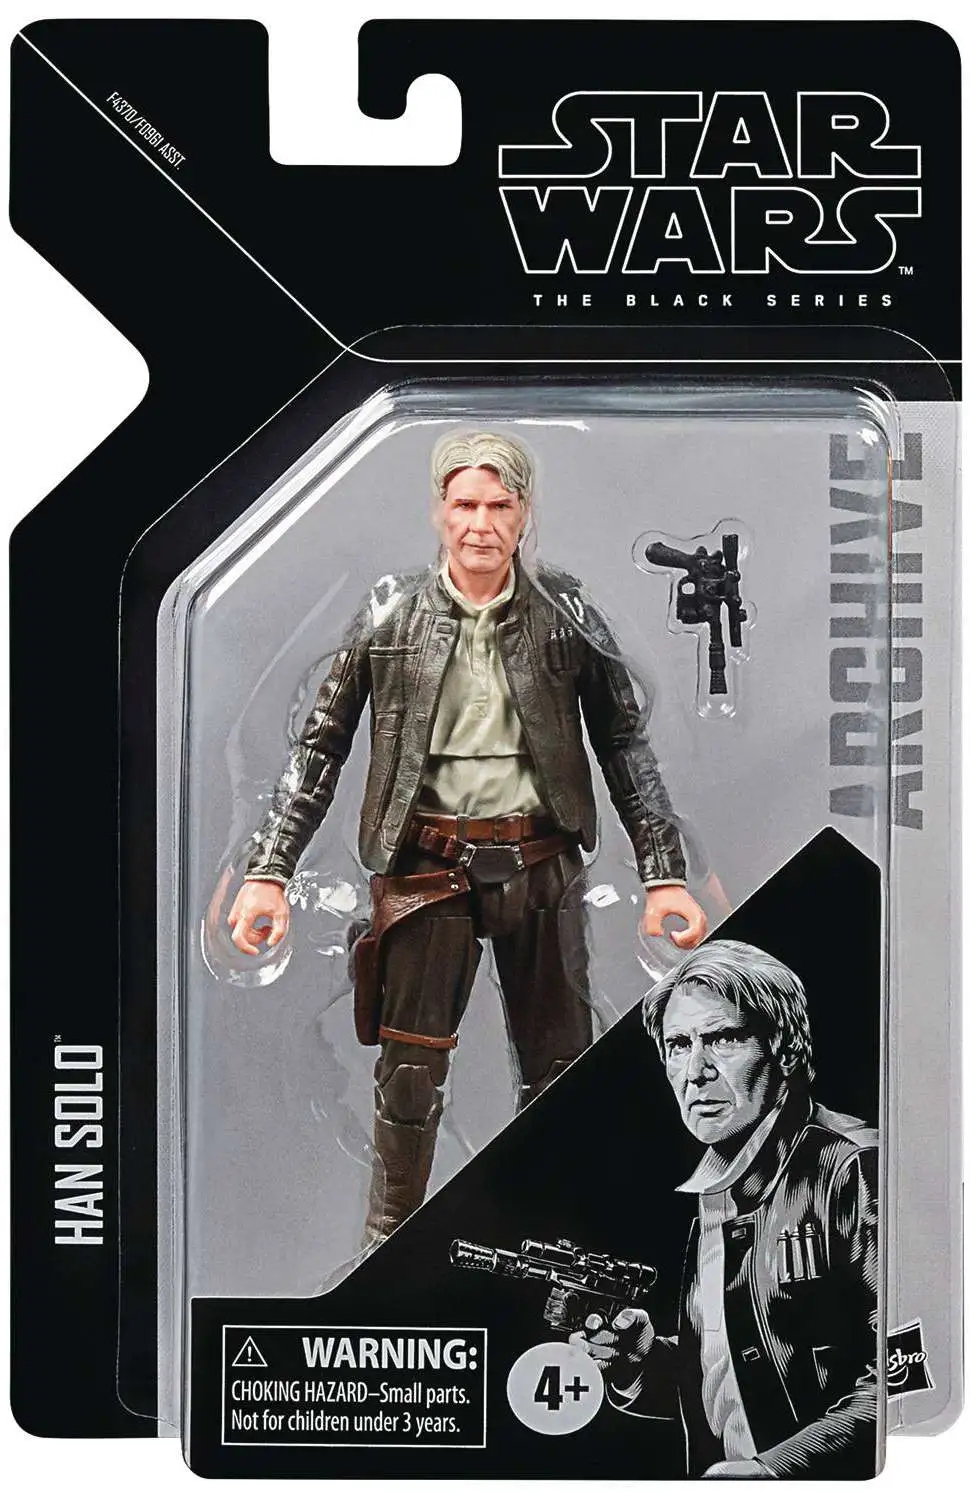 STAR WARS THE BLACK SERIES ARCHIVE WAVE 3 HAN SOLO HOTH 